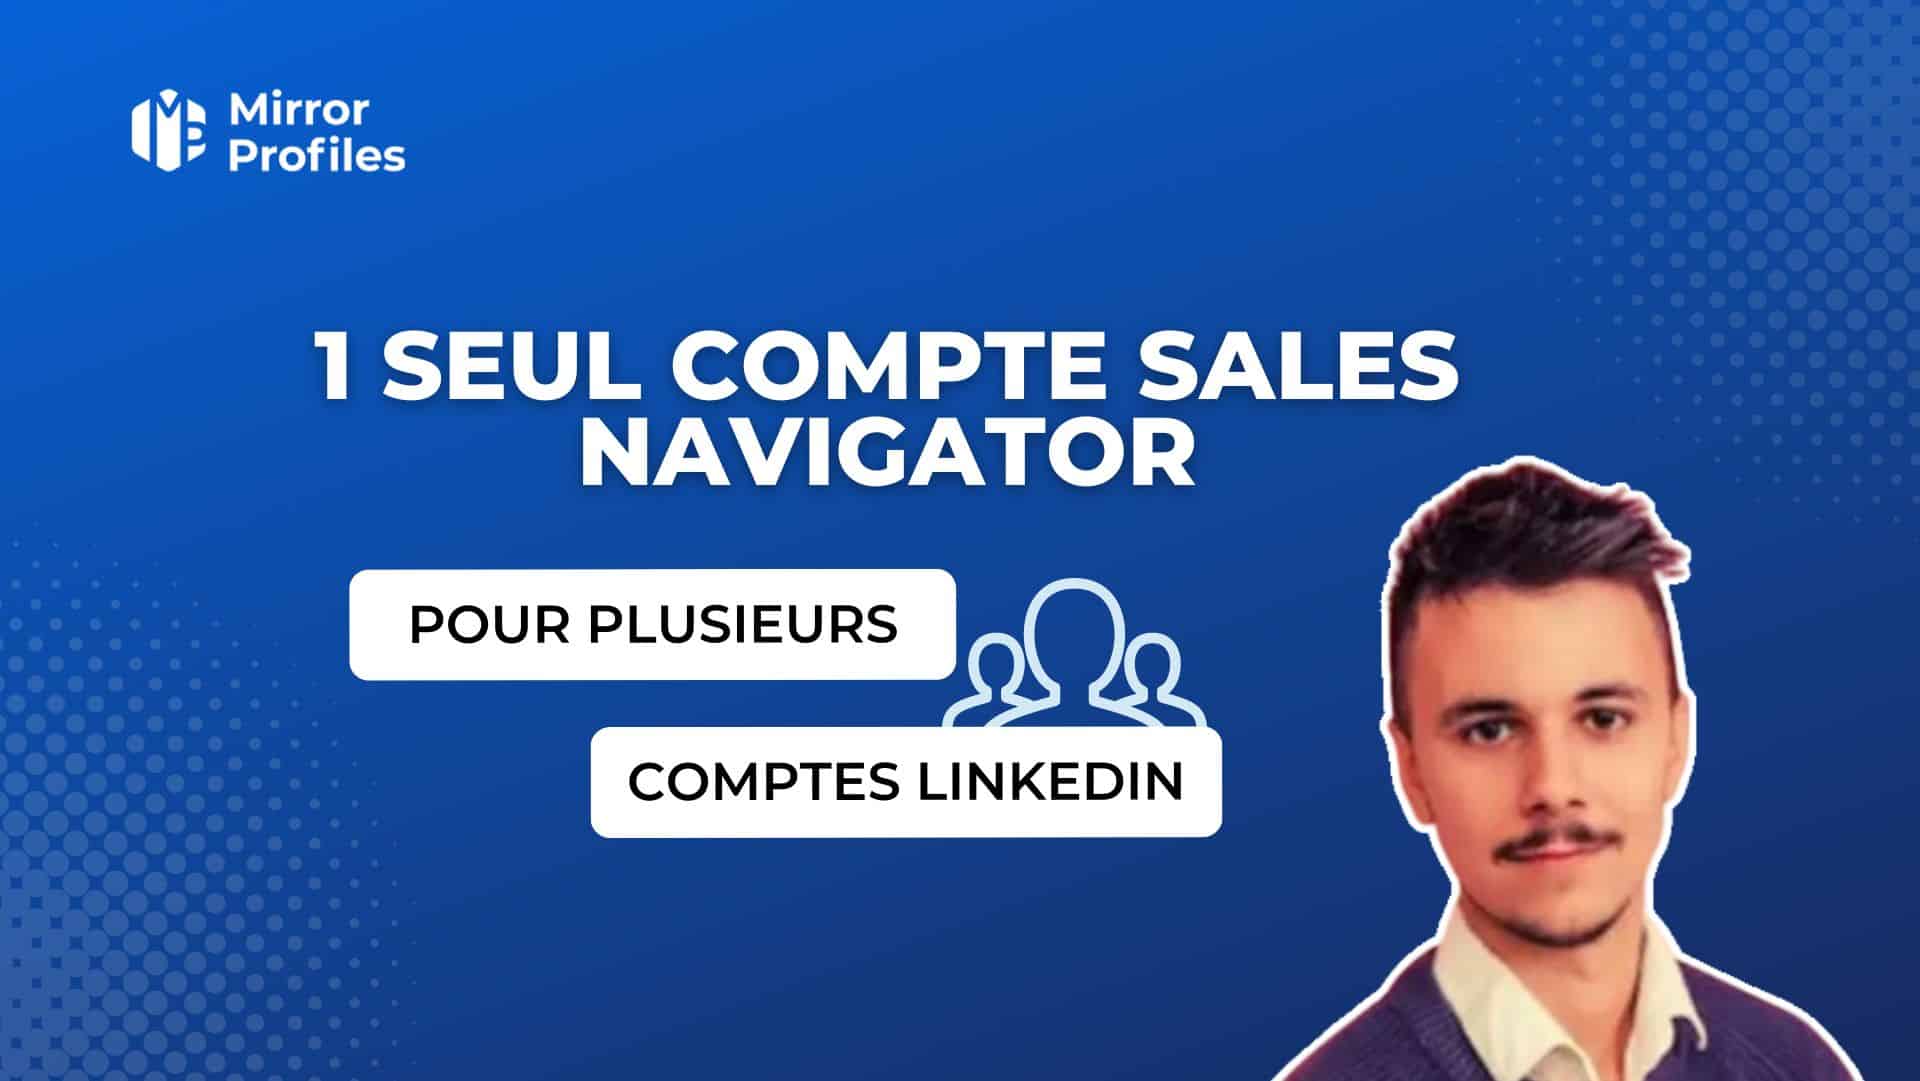 Promotional image for Mirror Profiles, featuring a man and French text about utilizing one single Sales Navigator account for several LinkedIn accounts. A logo of Mirror Profiles is visible on the top left.